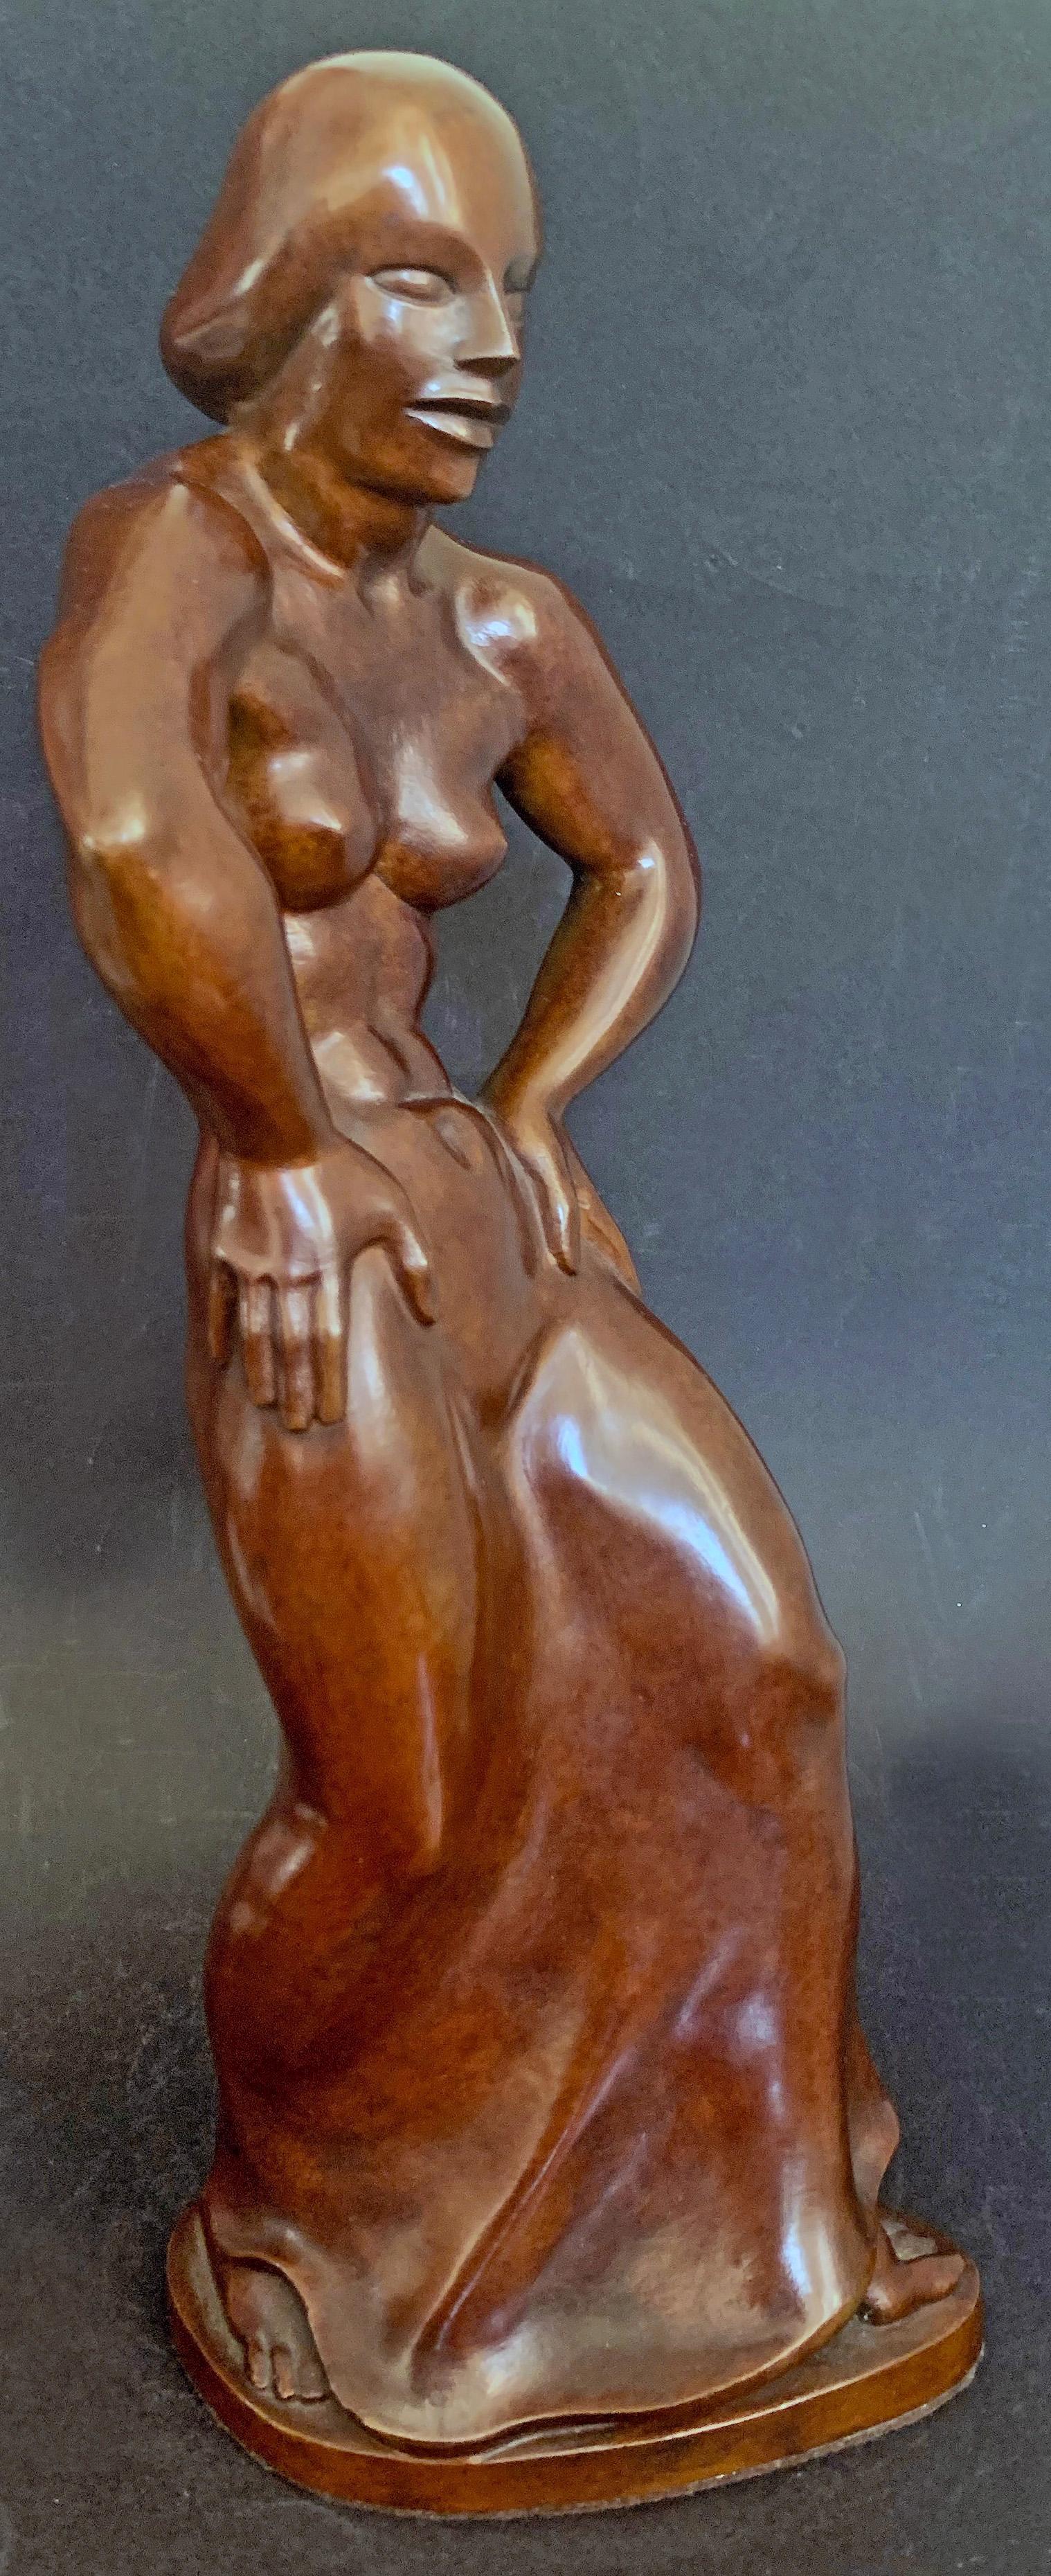 With her elbows jutting to the side and her hips thrust forward, the viewer can almost picture this dancer out on the floor, her dress flaring and her shoulders glistening from the heat of the night. Although this remarkable sculpture has the